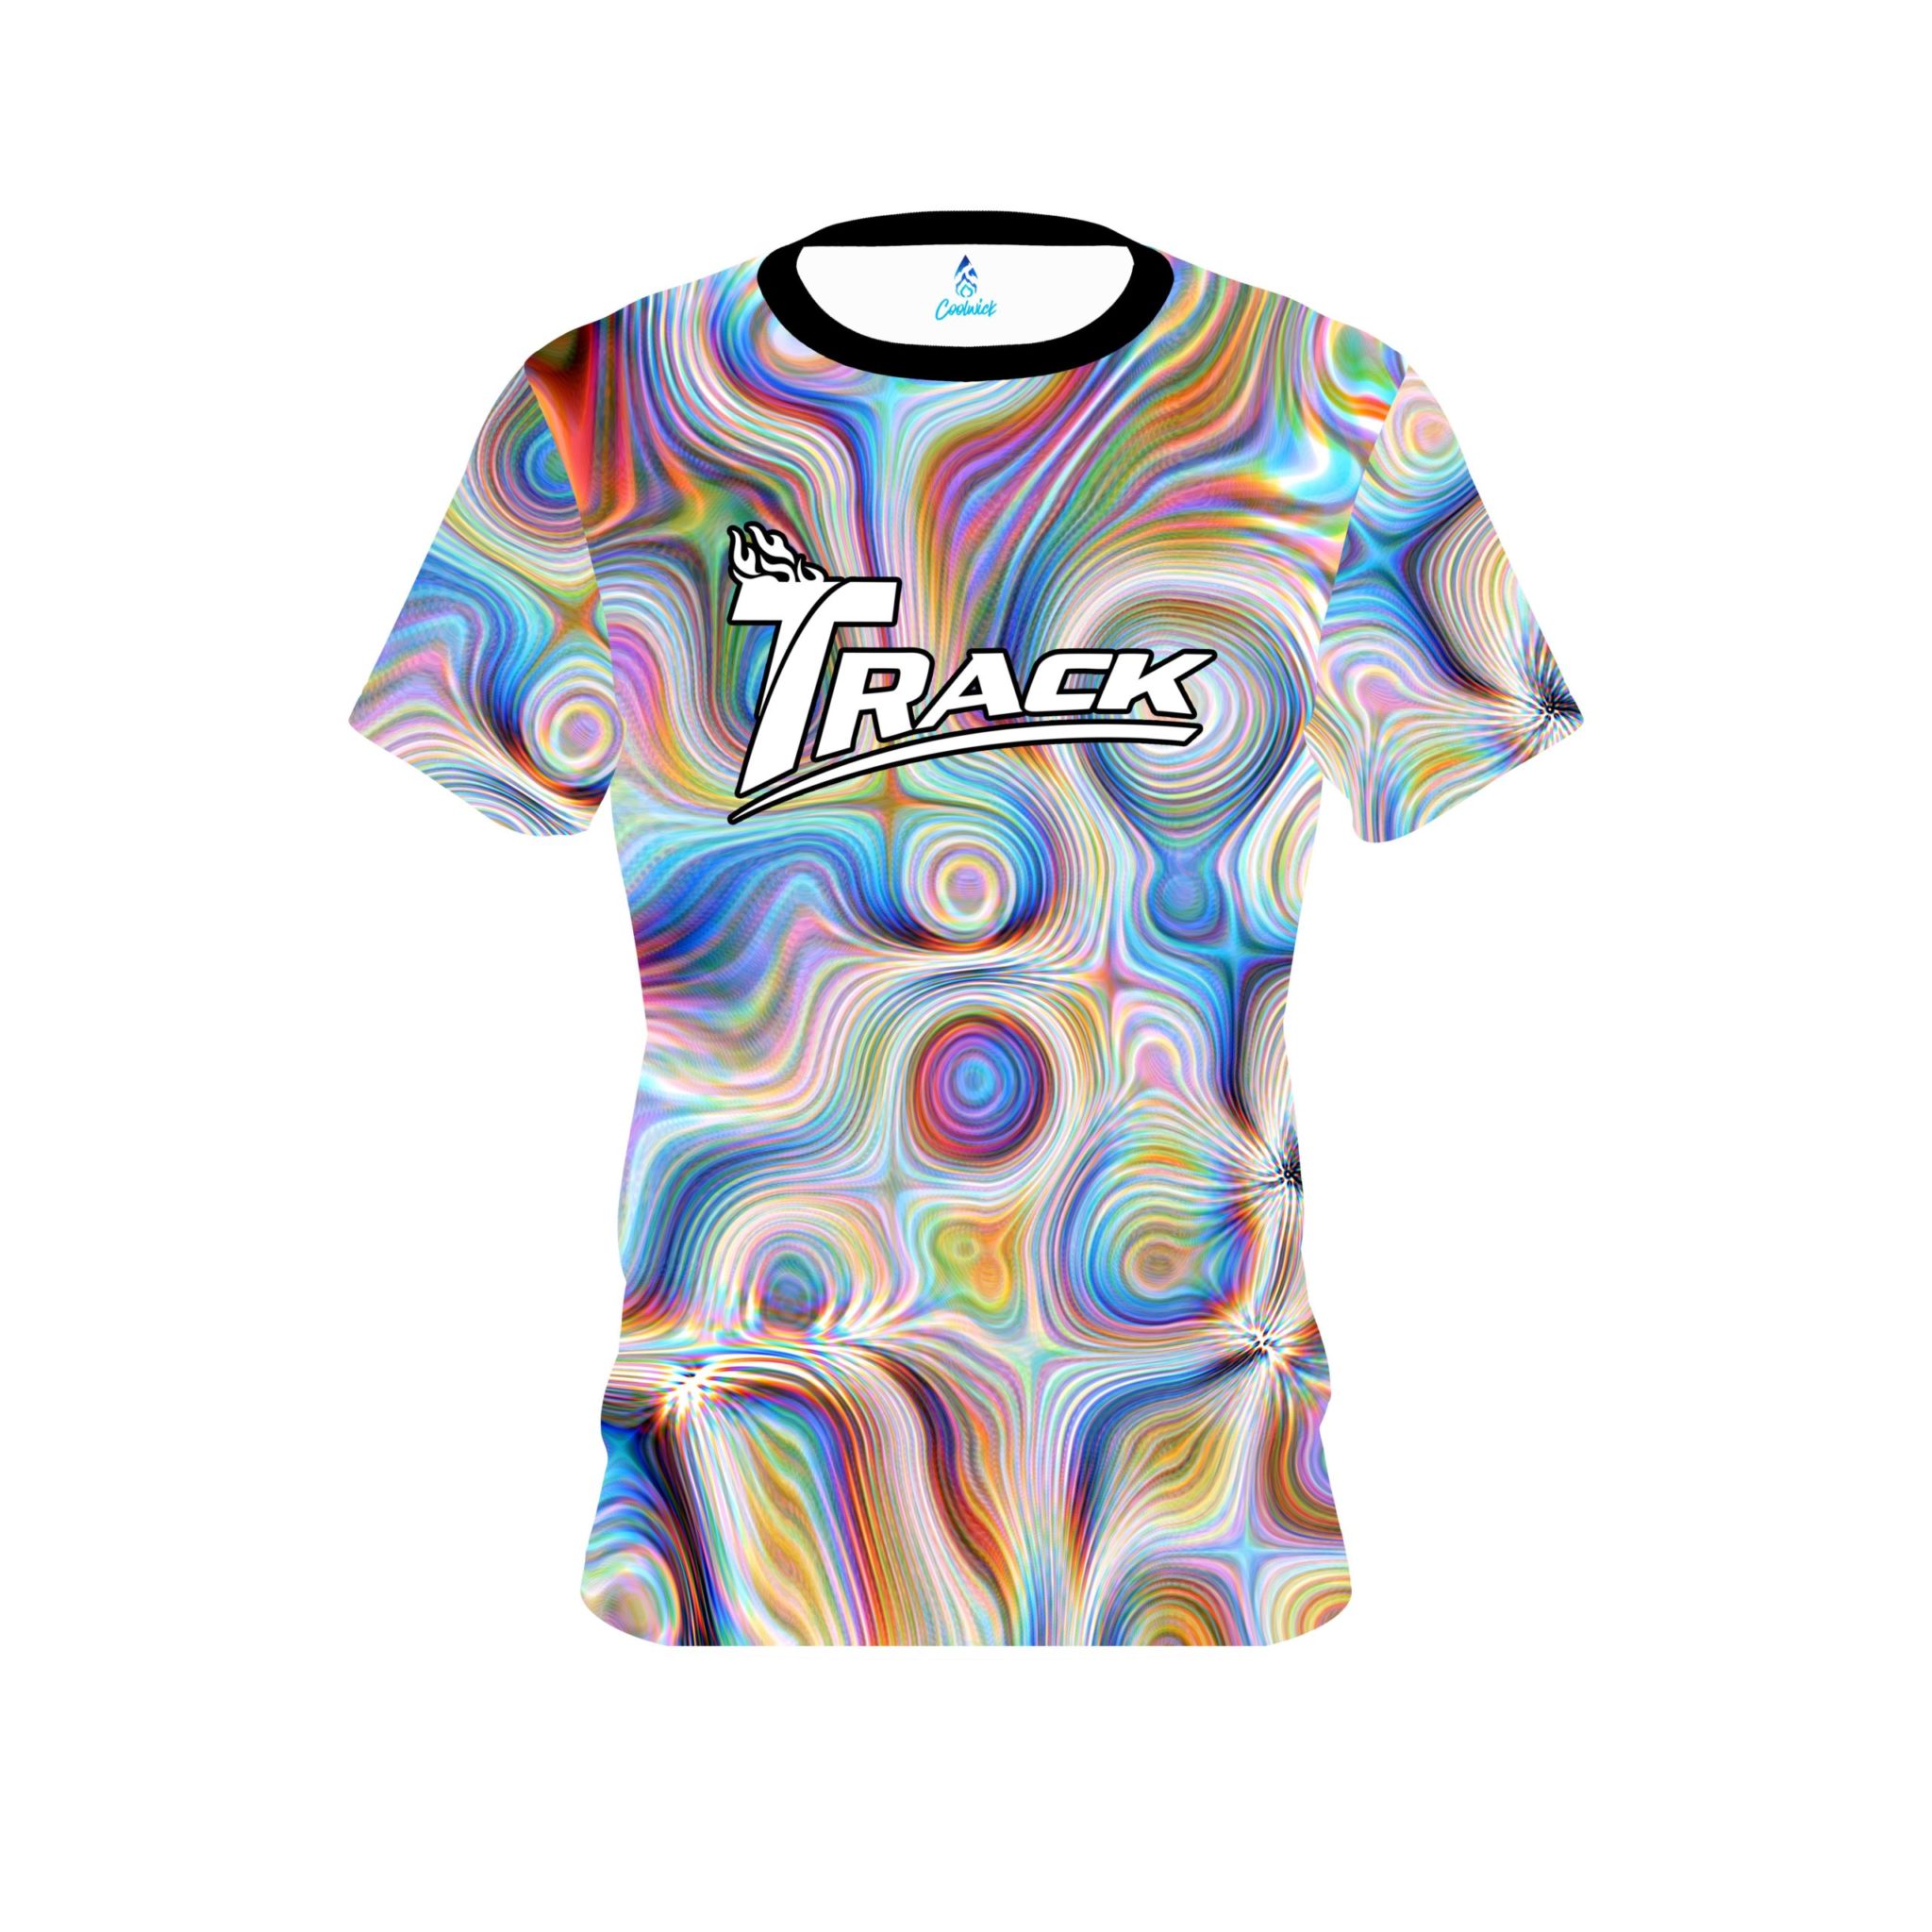 Track Rainbow Hallucinate CoolWick Bowling Jersey